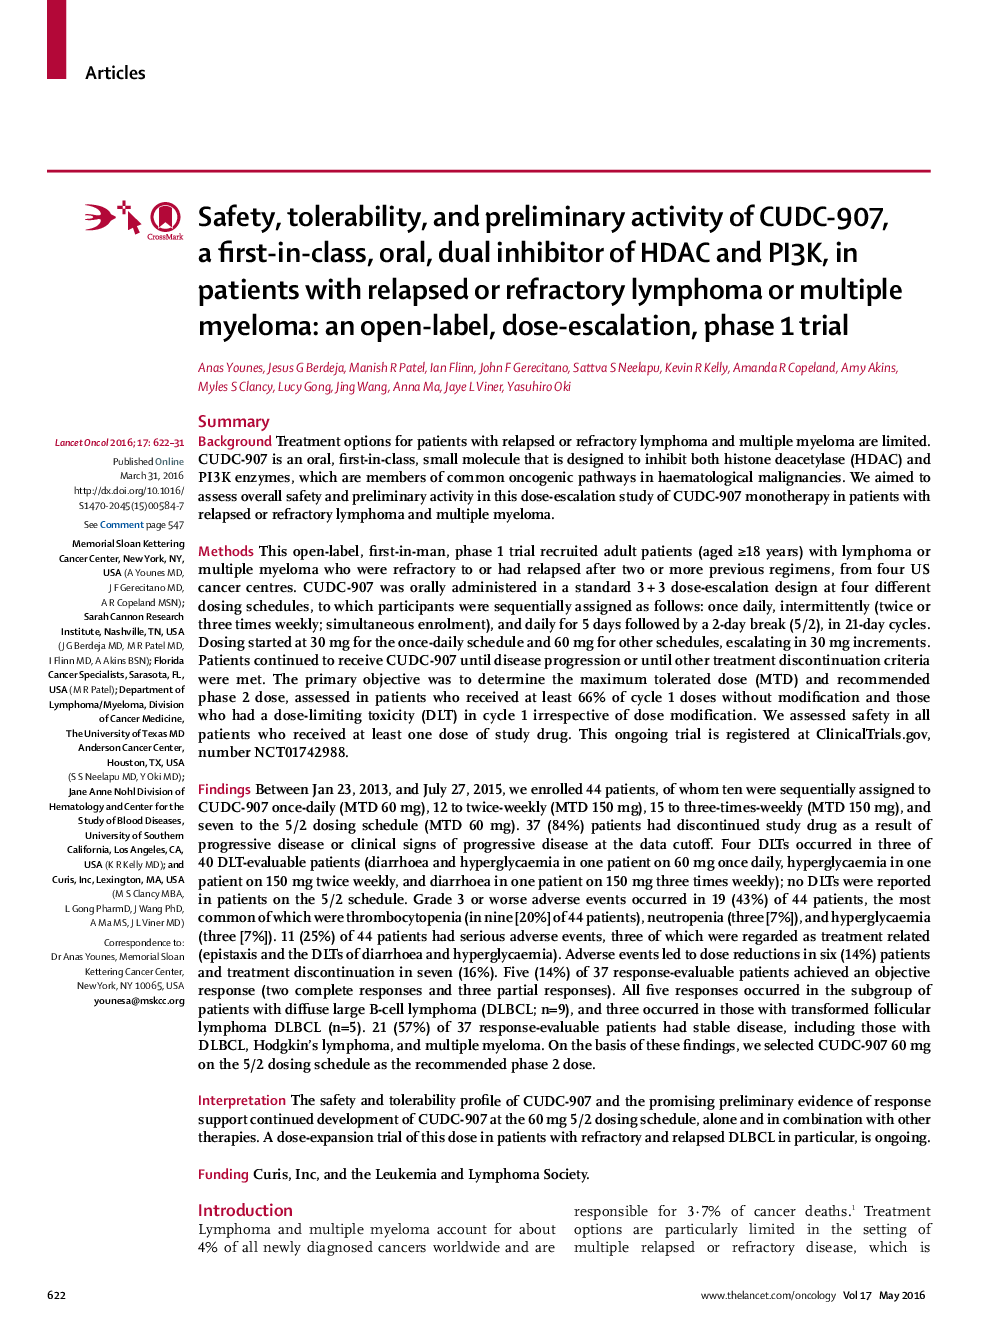 Safety, tolerability, and preliminary activity of CUDC-907, a first-in-class, oral, dual inhibitor of HDAC and PI3K, in patients with relapsed or refractory lymphoma or multiple myeloma: an open-label, dose-escalation, phase 1 trial